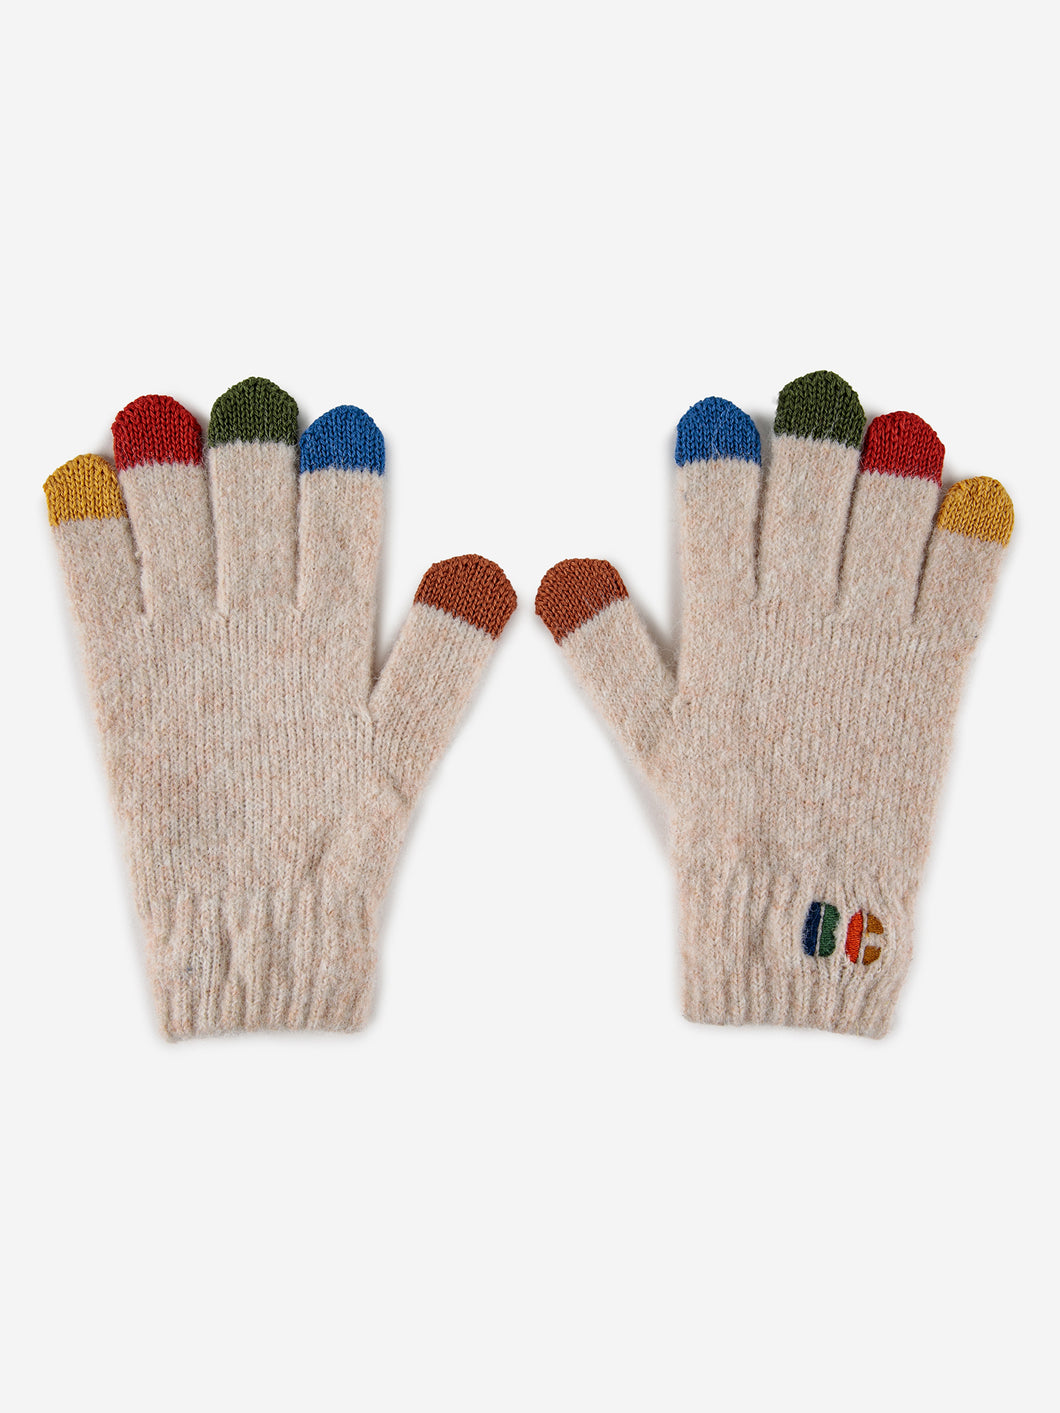 BC Colored Fingers knitted gloves 23AW / ボボショーズ キッズ ニットグローブ 手袋